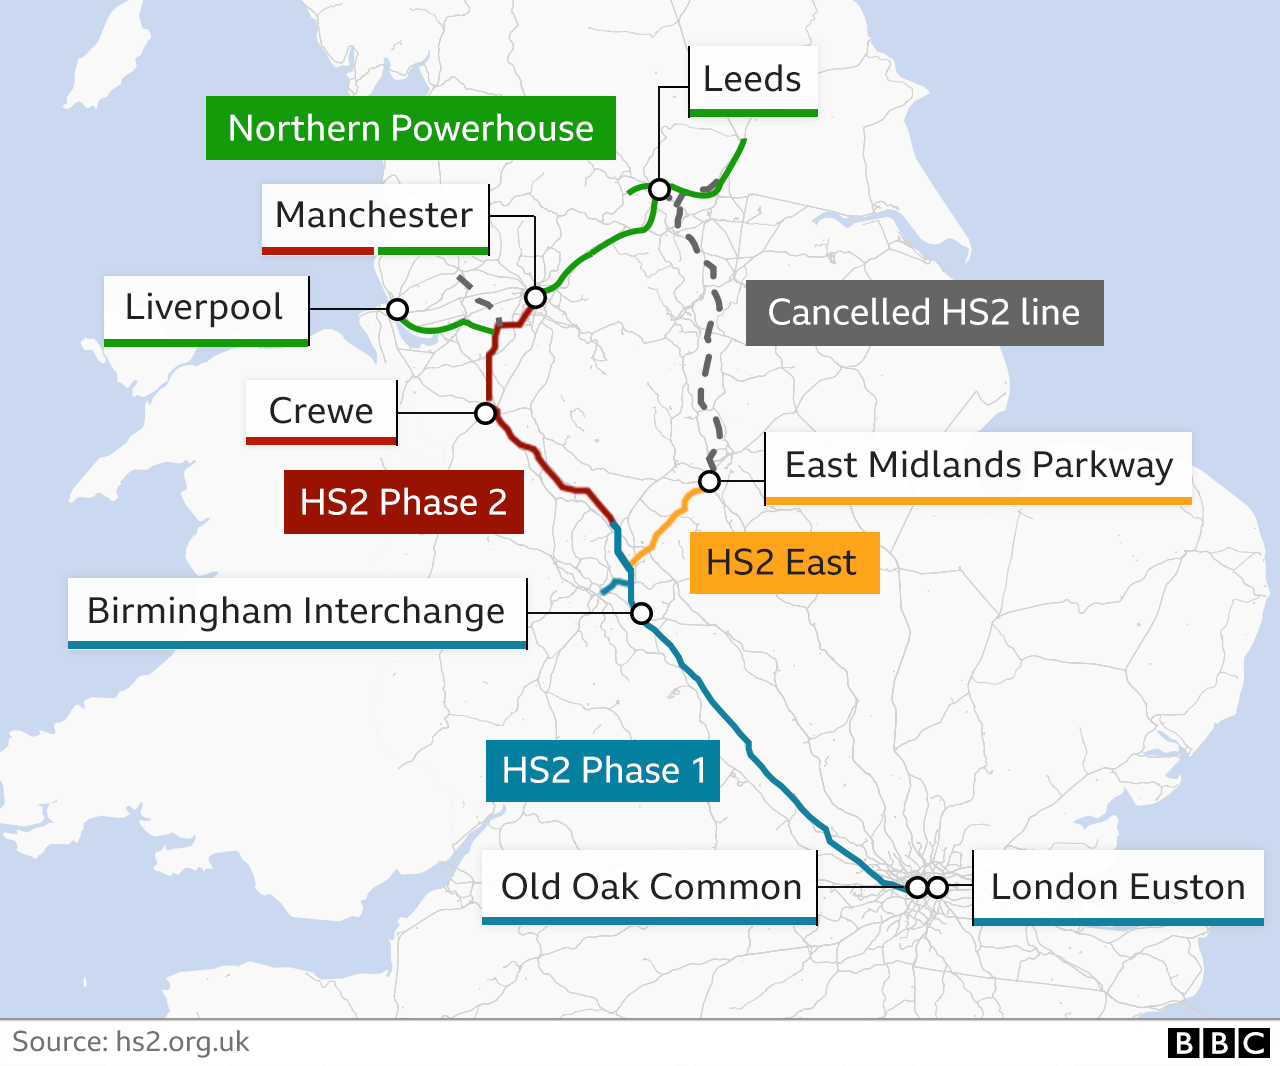 Map showing route of HS2 phases, along with plans for Northern Powerhouse and HS2 East lines